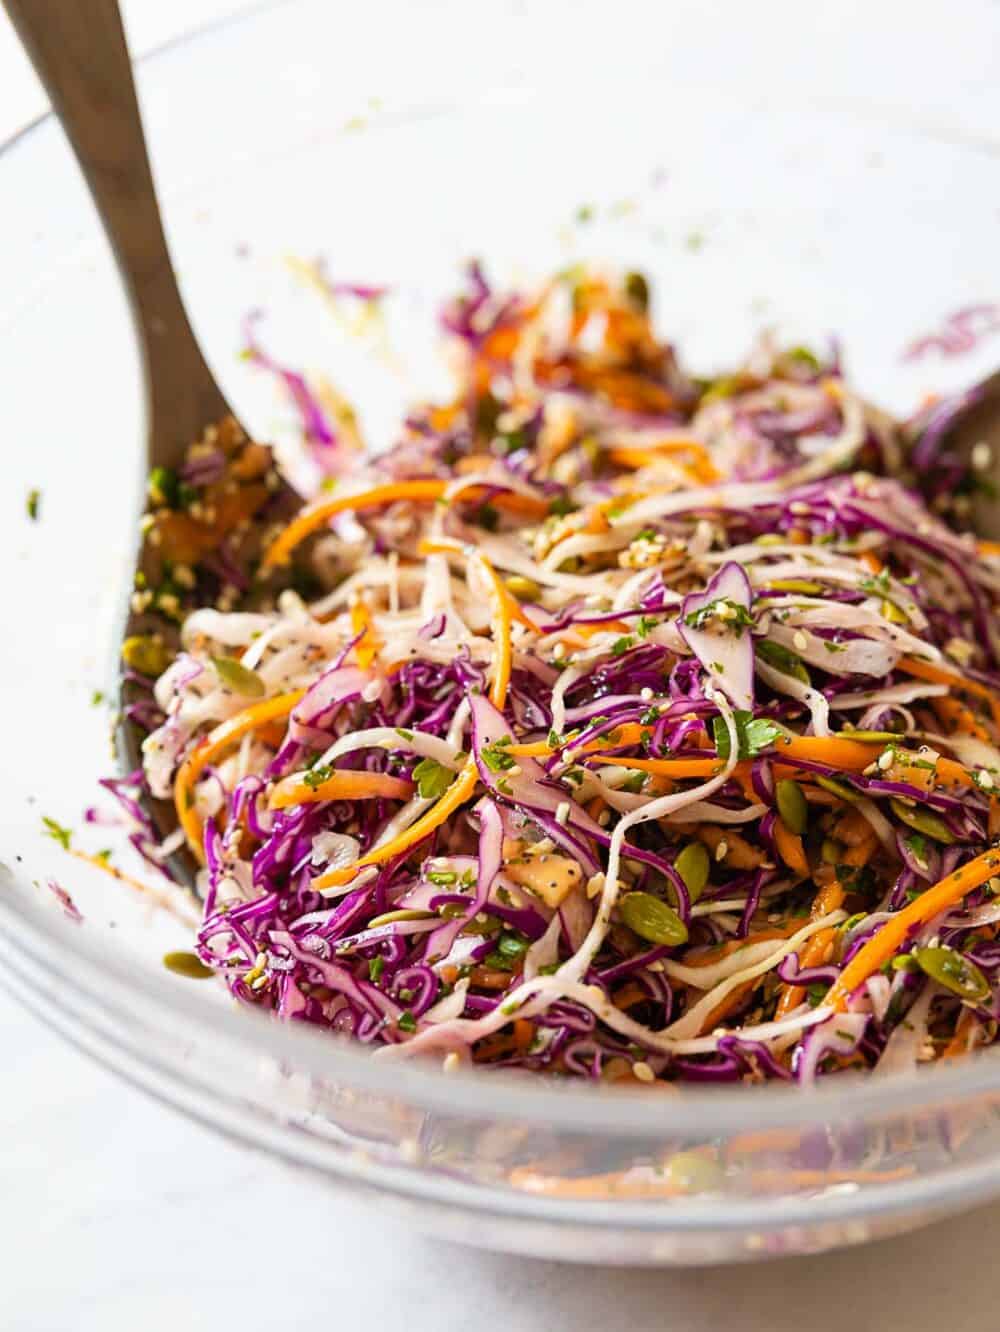 Coleslaw in a glass salad bowl.